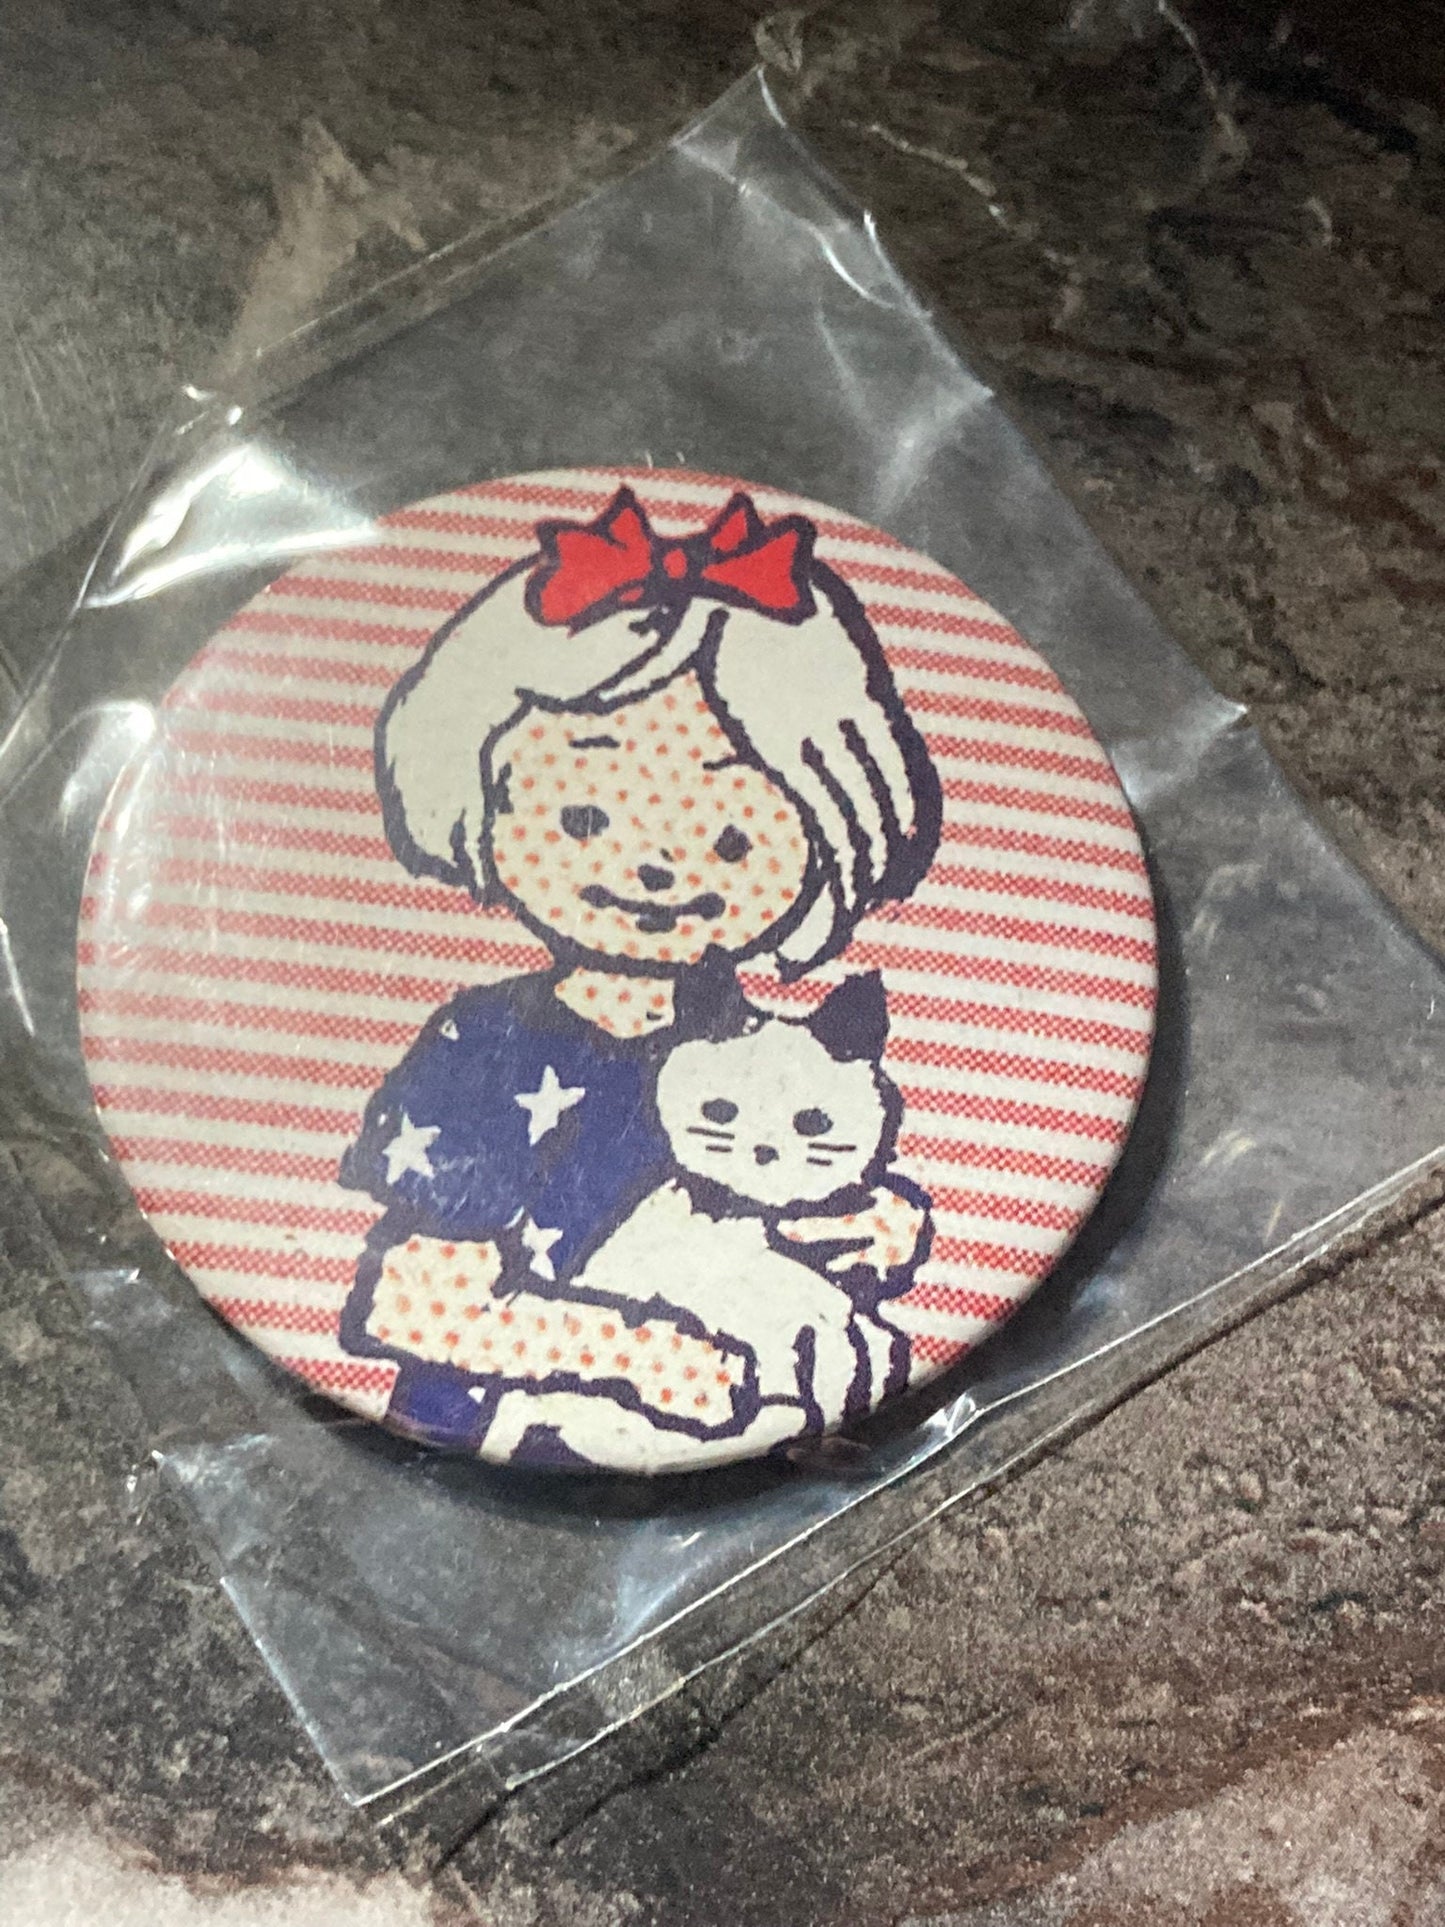 Retro cute and kitsch small handbag purse size pocket hand mirror little girl and cat